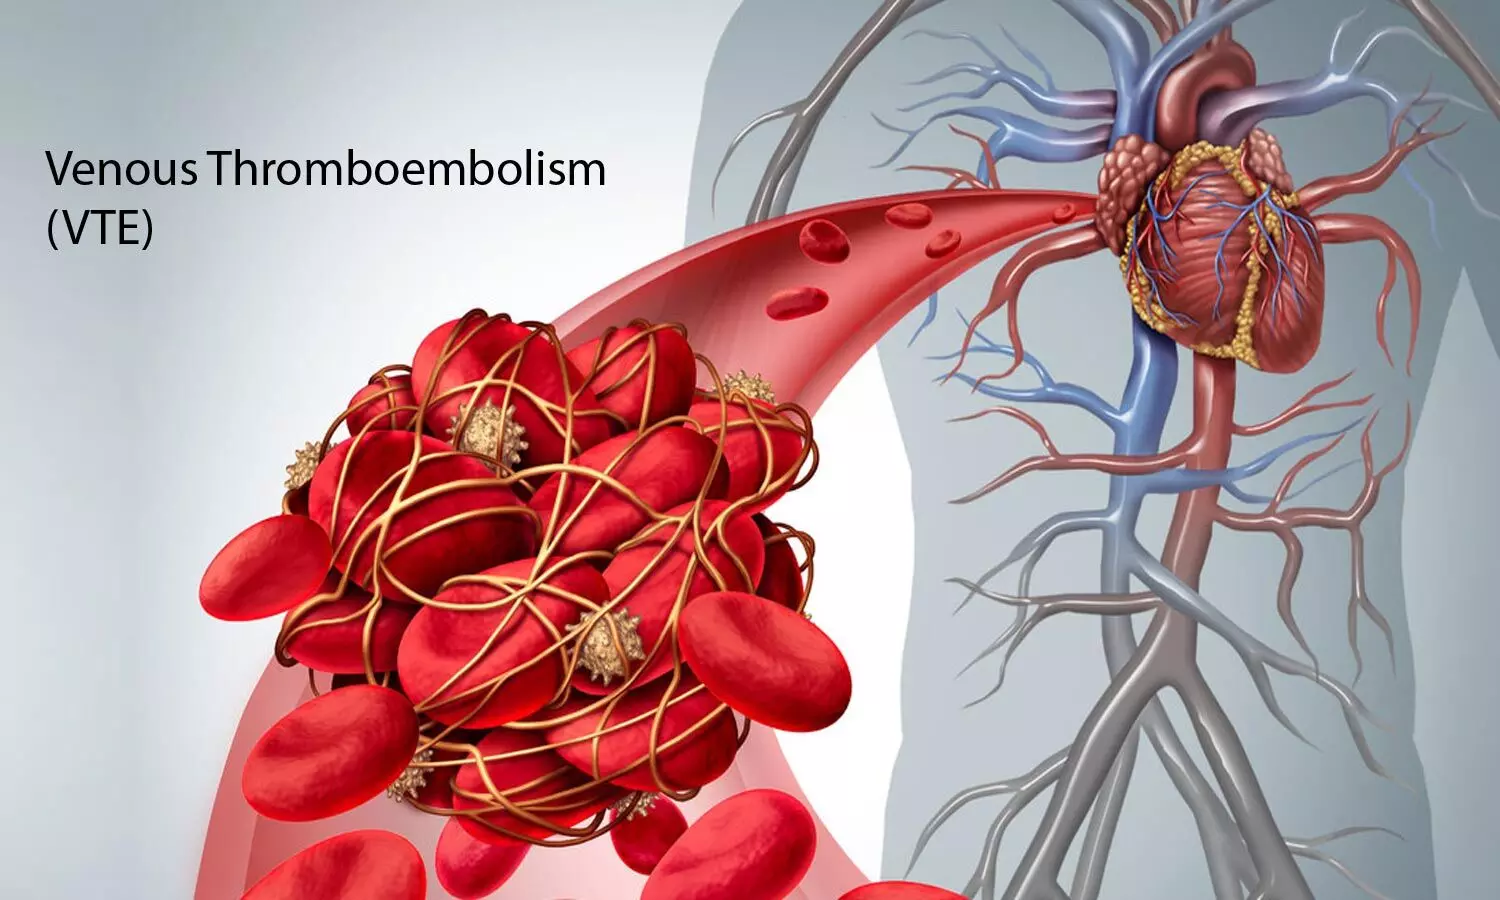 Oral Milvexian effective in prevention of venous thromboembolism: NEJM